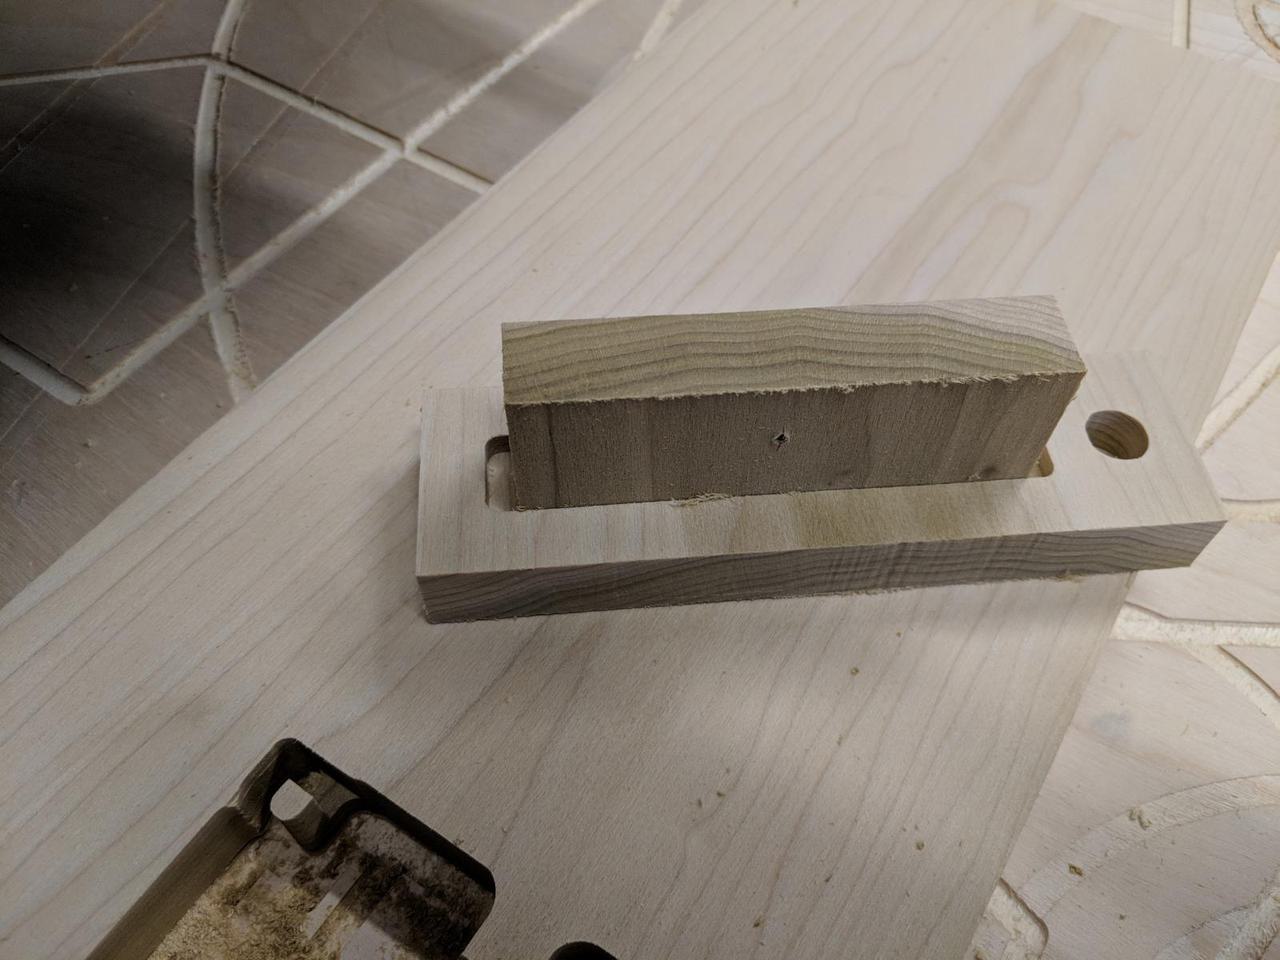 Two pieces of 0.5 inch wood joined together. The protrusions of one fit into the hole of the other, but since this is the top view, you can't tell.